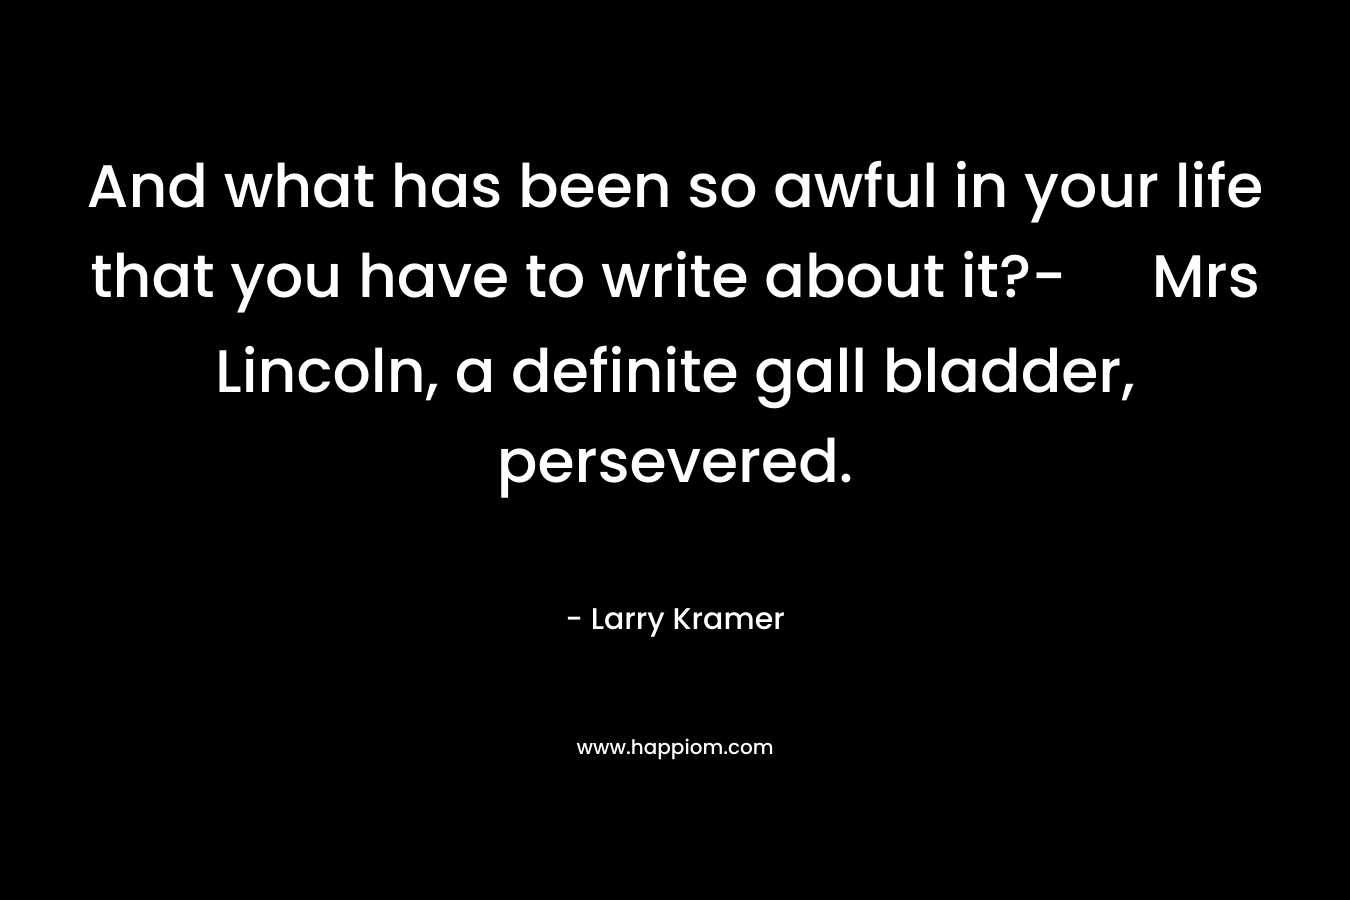 And what has been so awful in your life that you have to write about it?- Mrs Lincoln, a definite gall bladder, persevered. – Larry Kramer